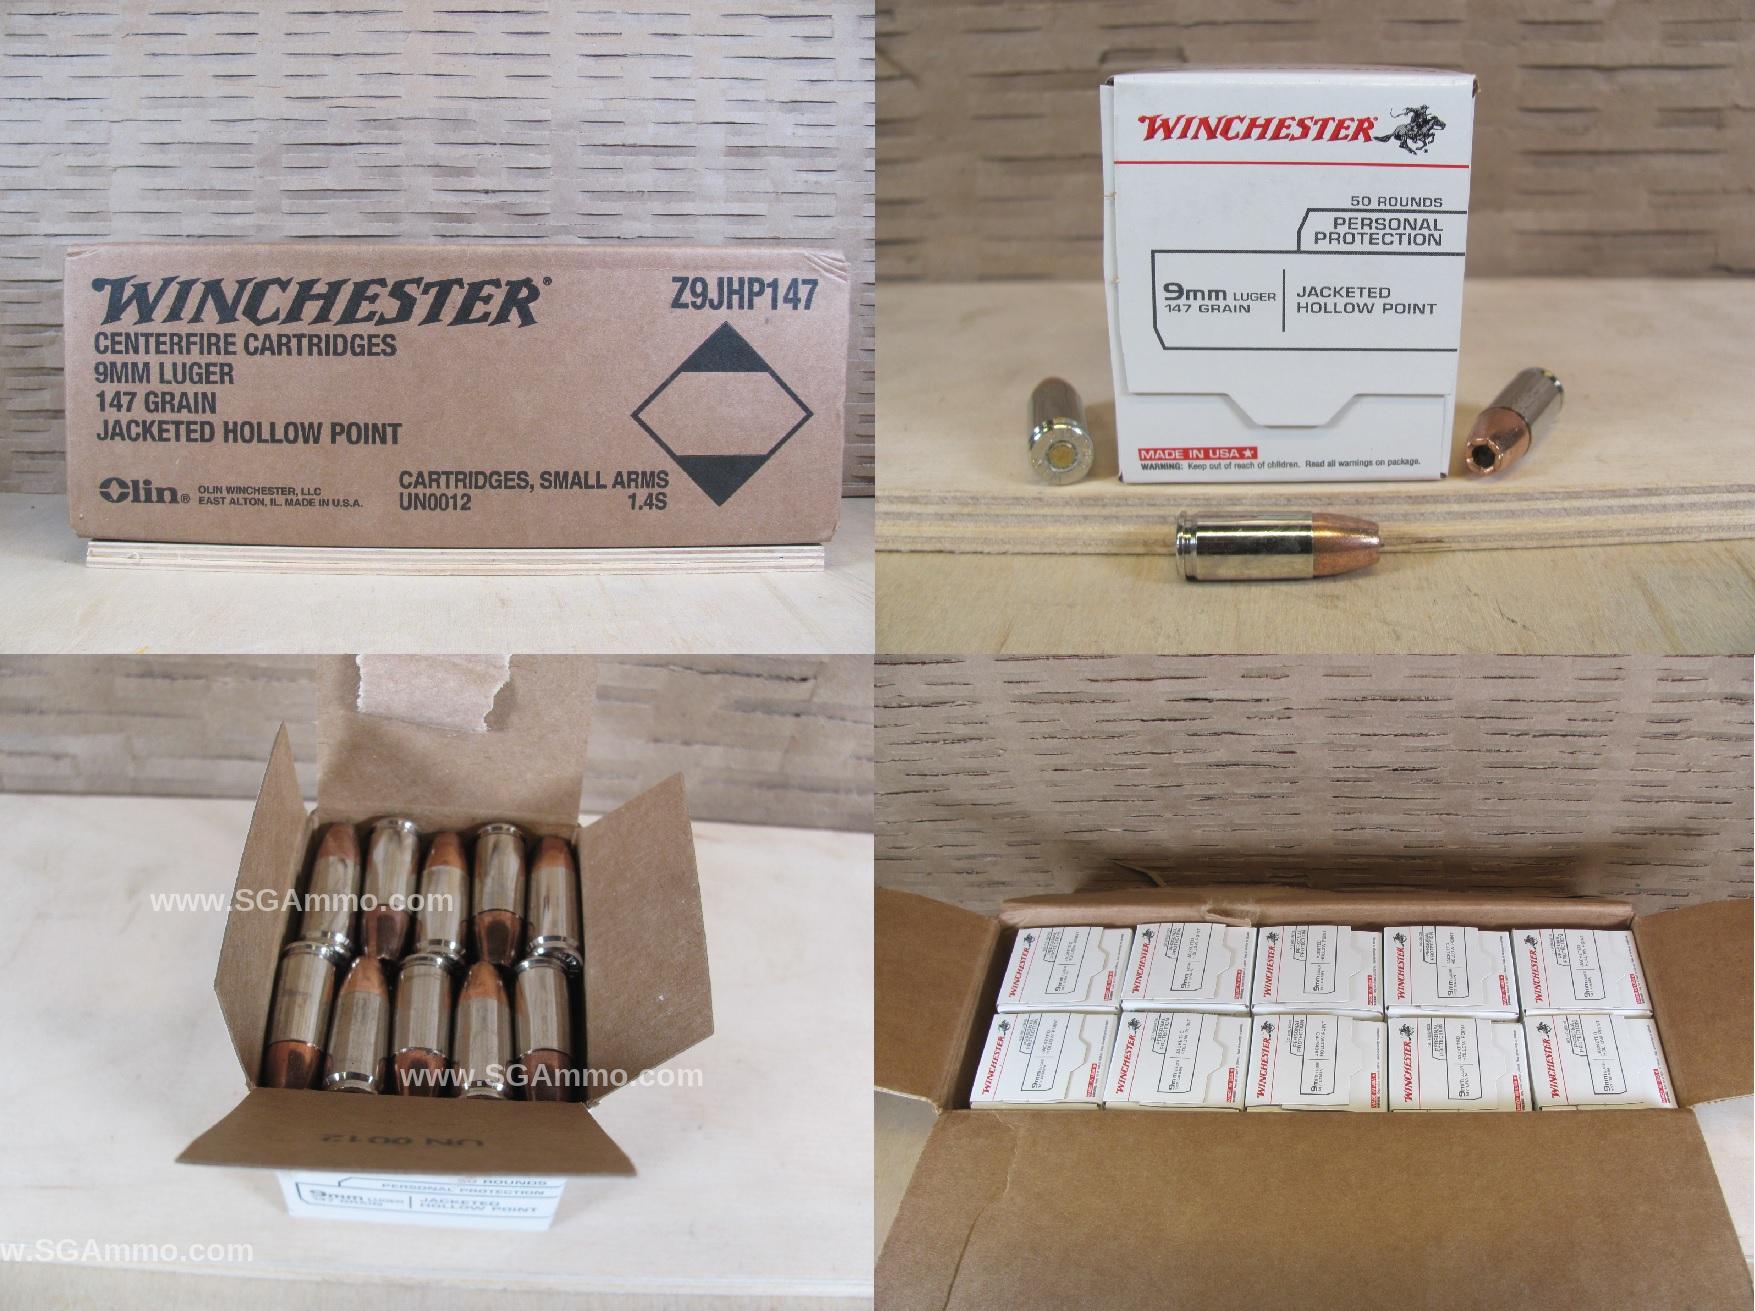 1000 Round Case - 9mm Luger 147 Grain Jacketed Hollow Point Winchester T-Series Ammo - Z9JHP147